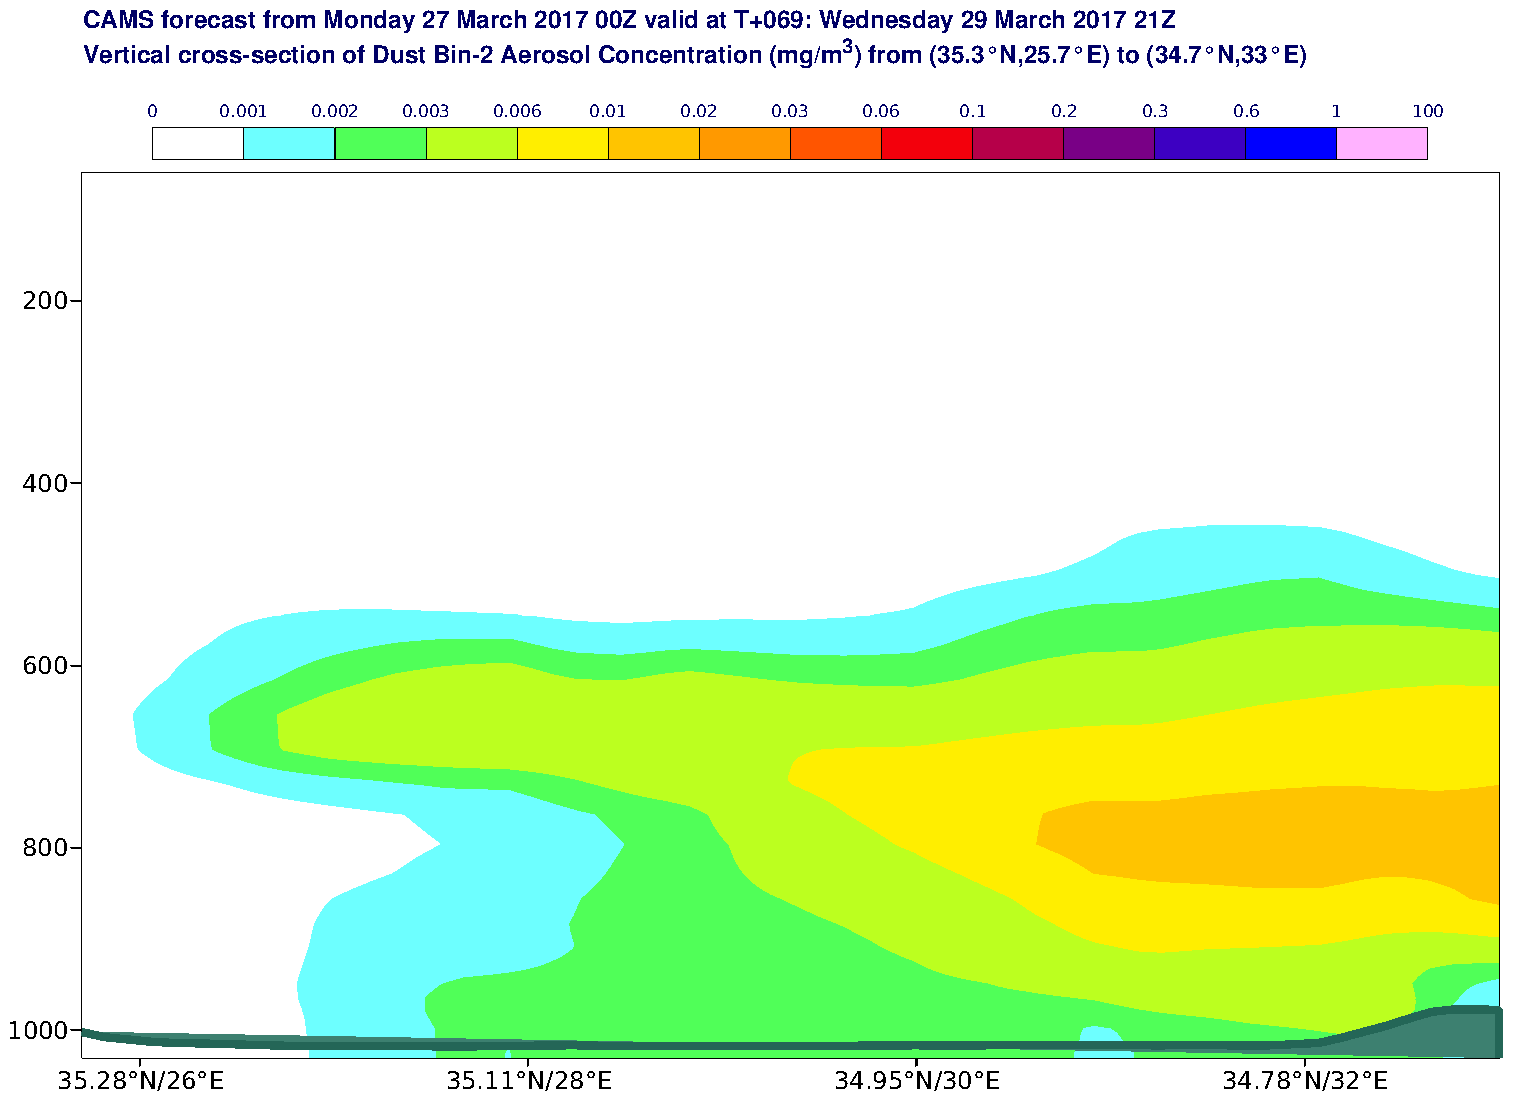 Vertical cross-section of Dust Bin-2 Aerosol Concentration (mg/m3) valid at T69 - 2017-03-29 21:00